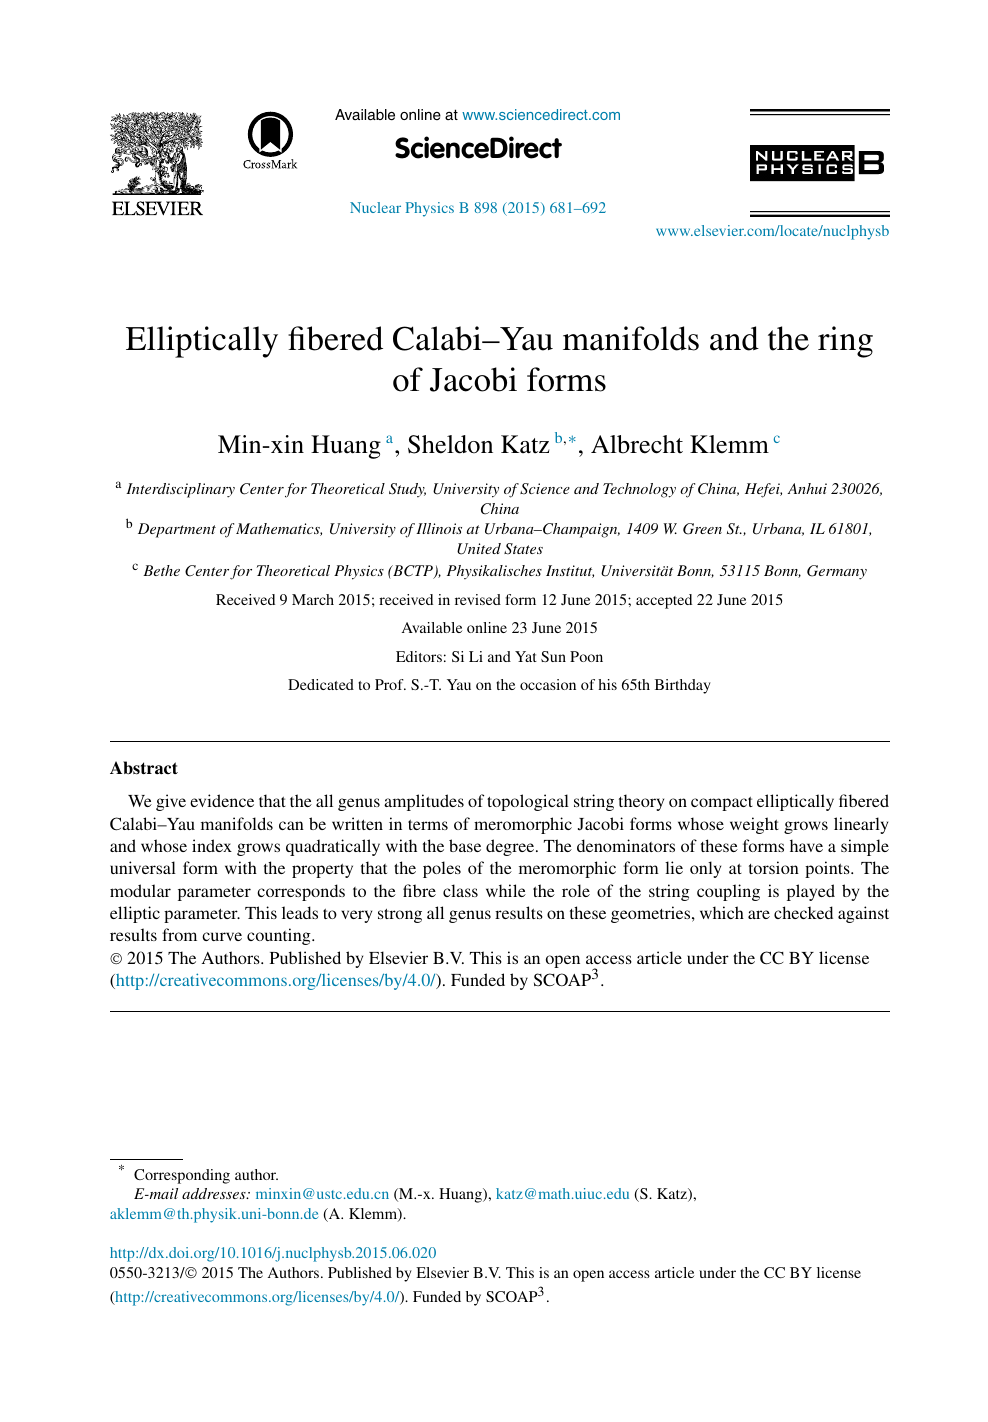 Elliptically Fibered Calabi Yau Manifolds And The Ring Of Jacobi Forms Topic Of Research Paper In Physical Sciences Download Scholarly Article Pdf And Read For Free On Cyberleninka Open Science Hub